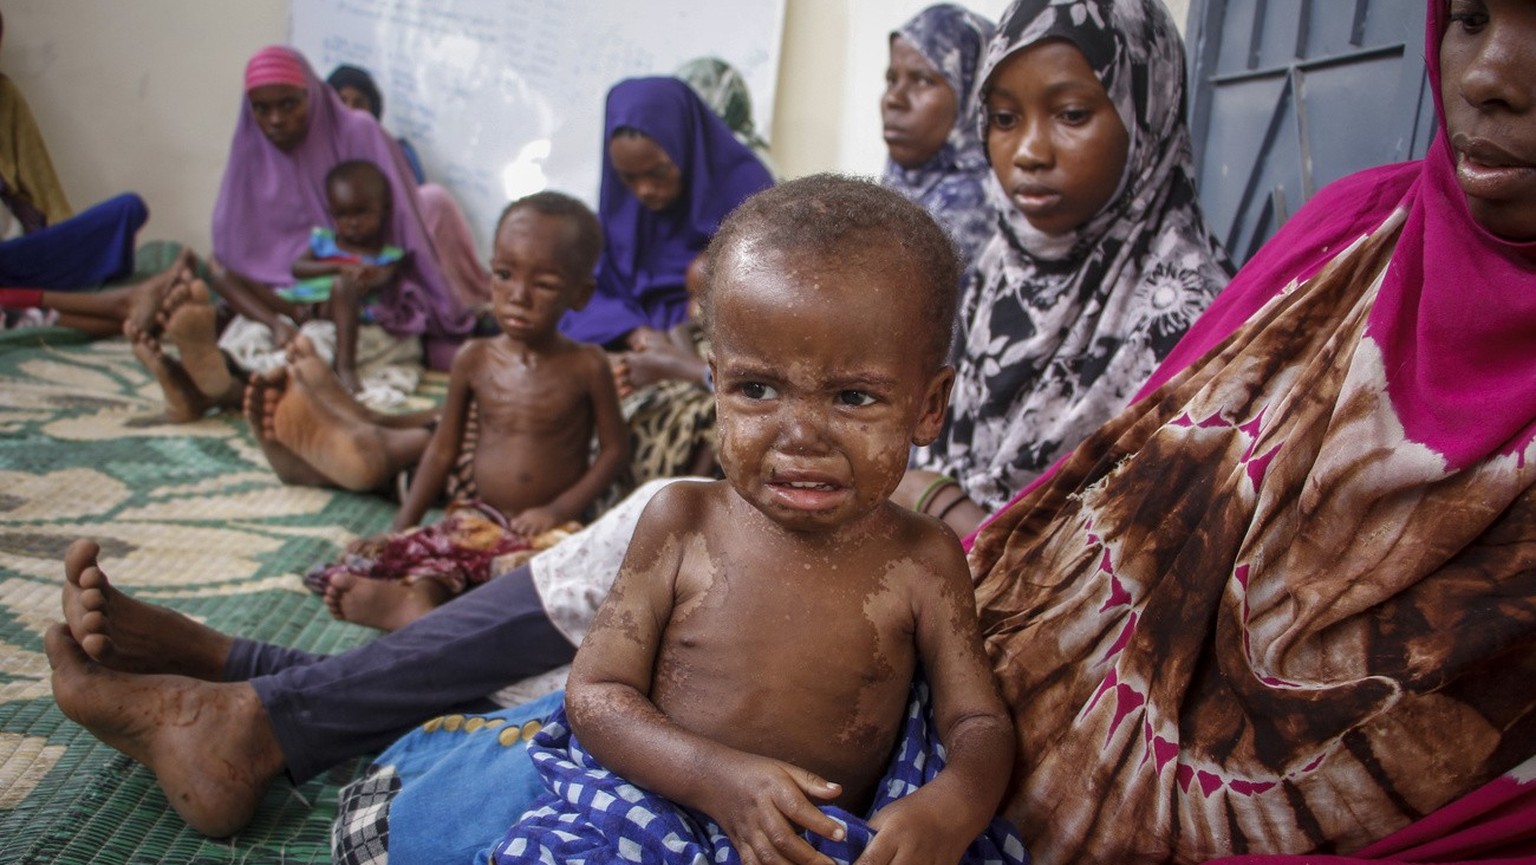 Somali children displaced by drought and showing symptoms of Kwashiorkor, a severe protein malnutrition causing swelling and skin lesions, sit with their mothers at a malnutrition stabilization center ...